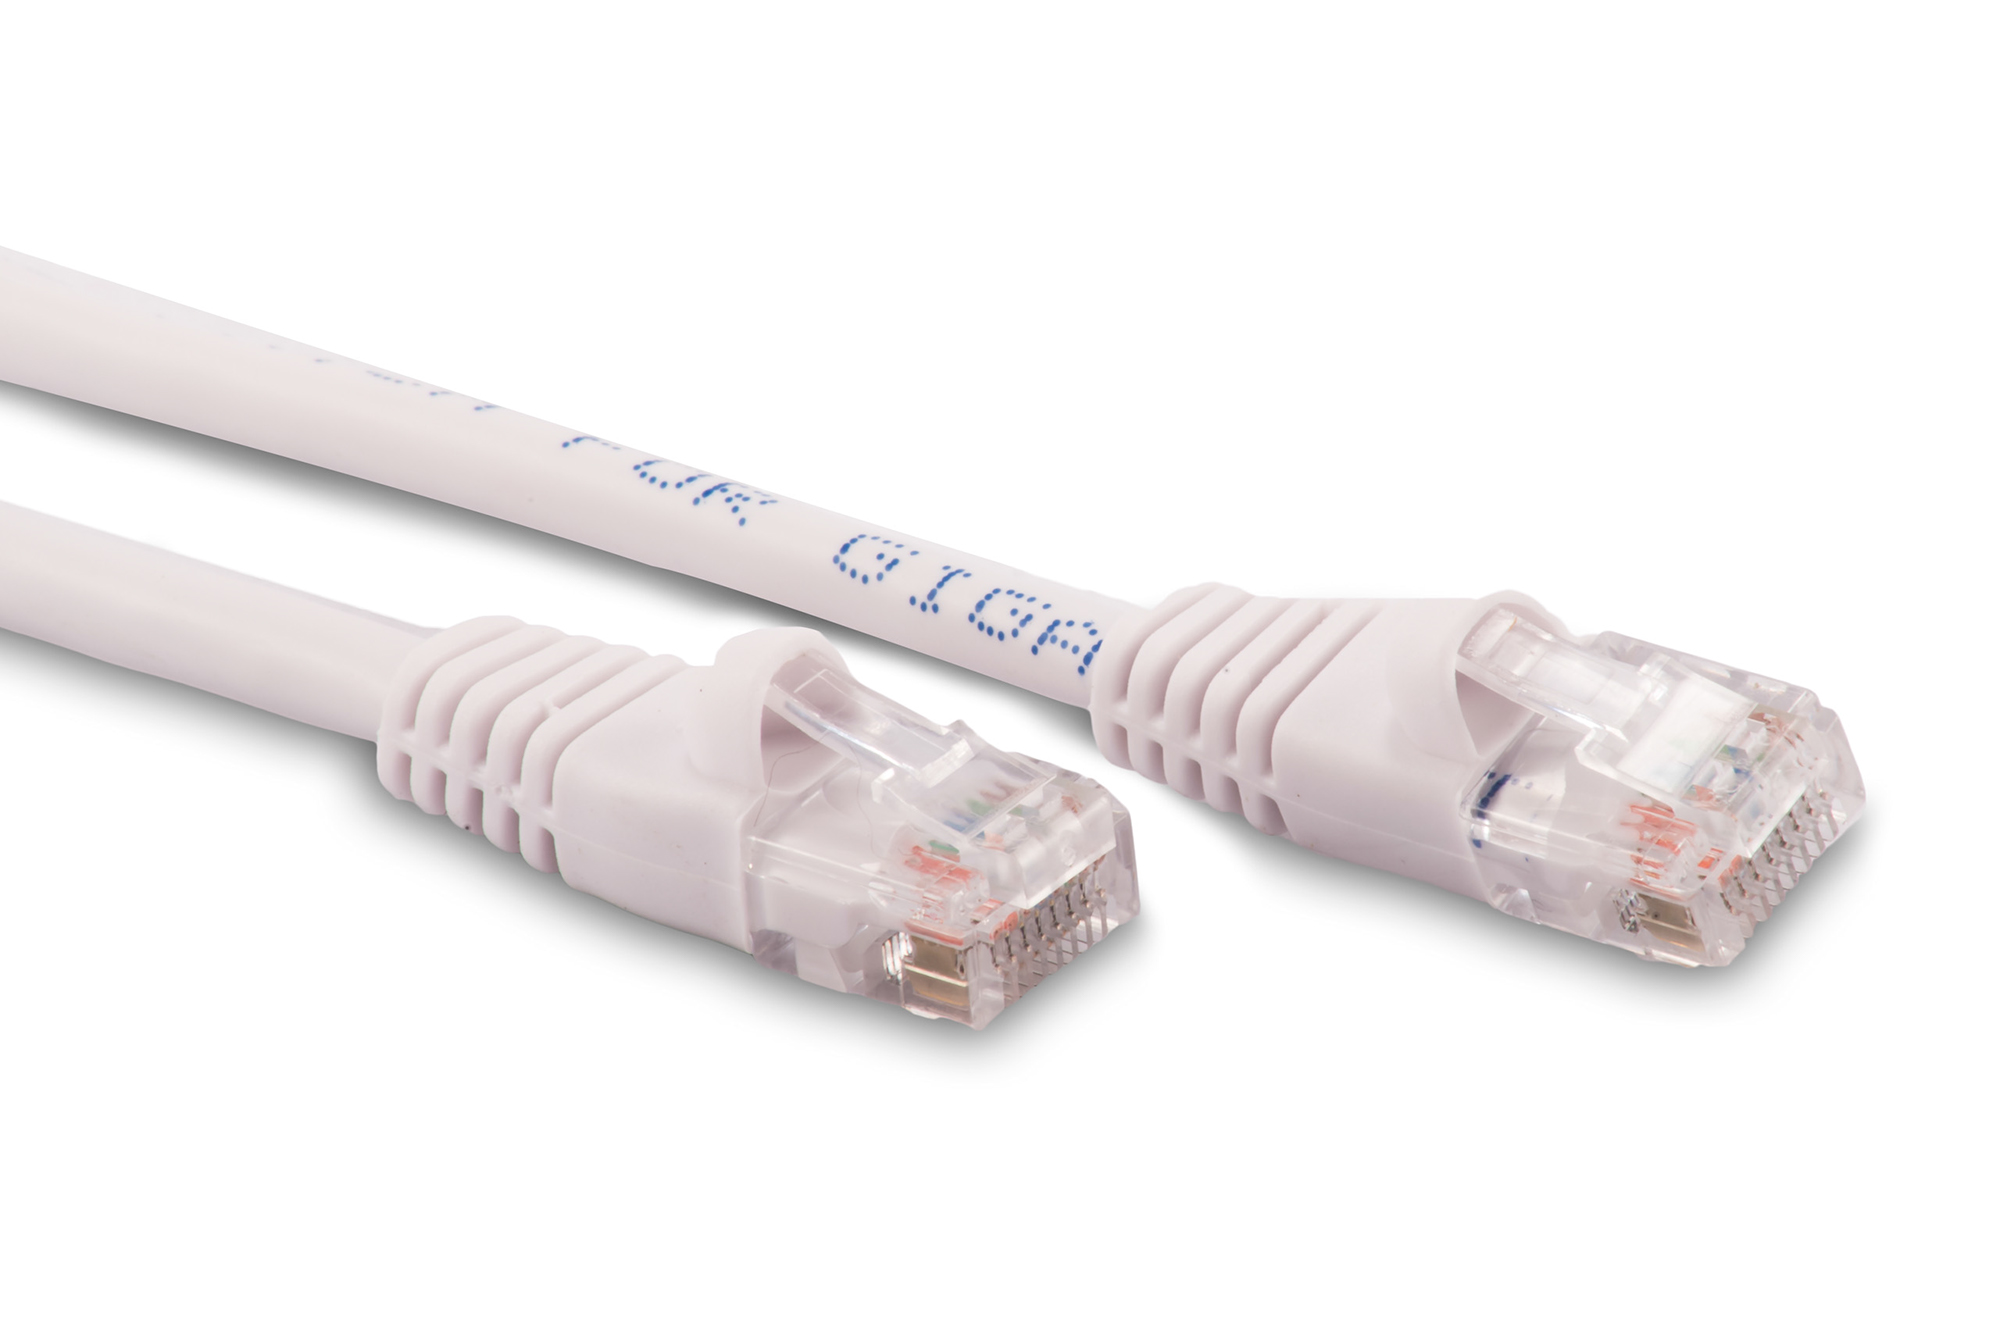 50ft Cat6 Ethernet Patch Cable - White Color - Snagless Boot, Stranded, RJ45, 550Mhz, 24AWG